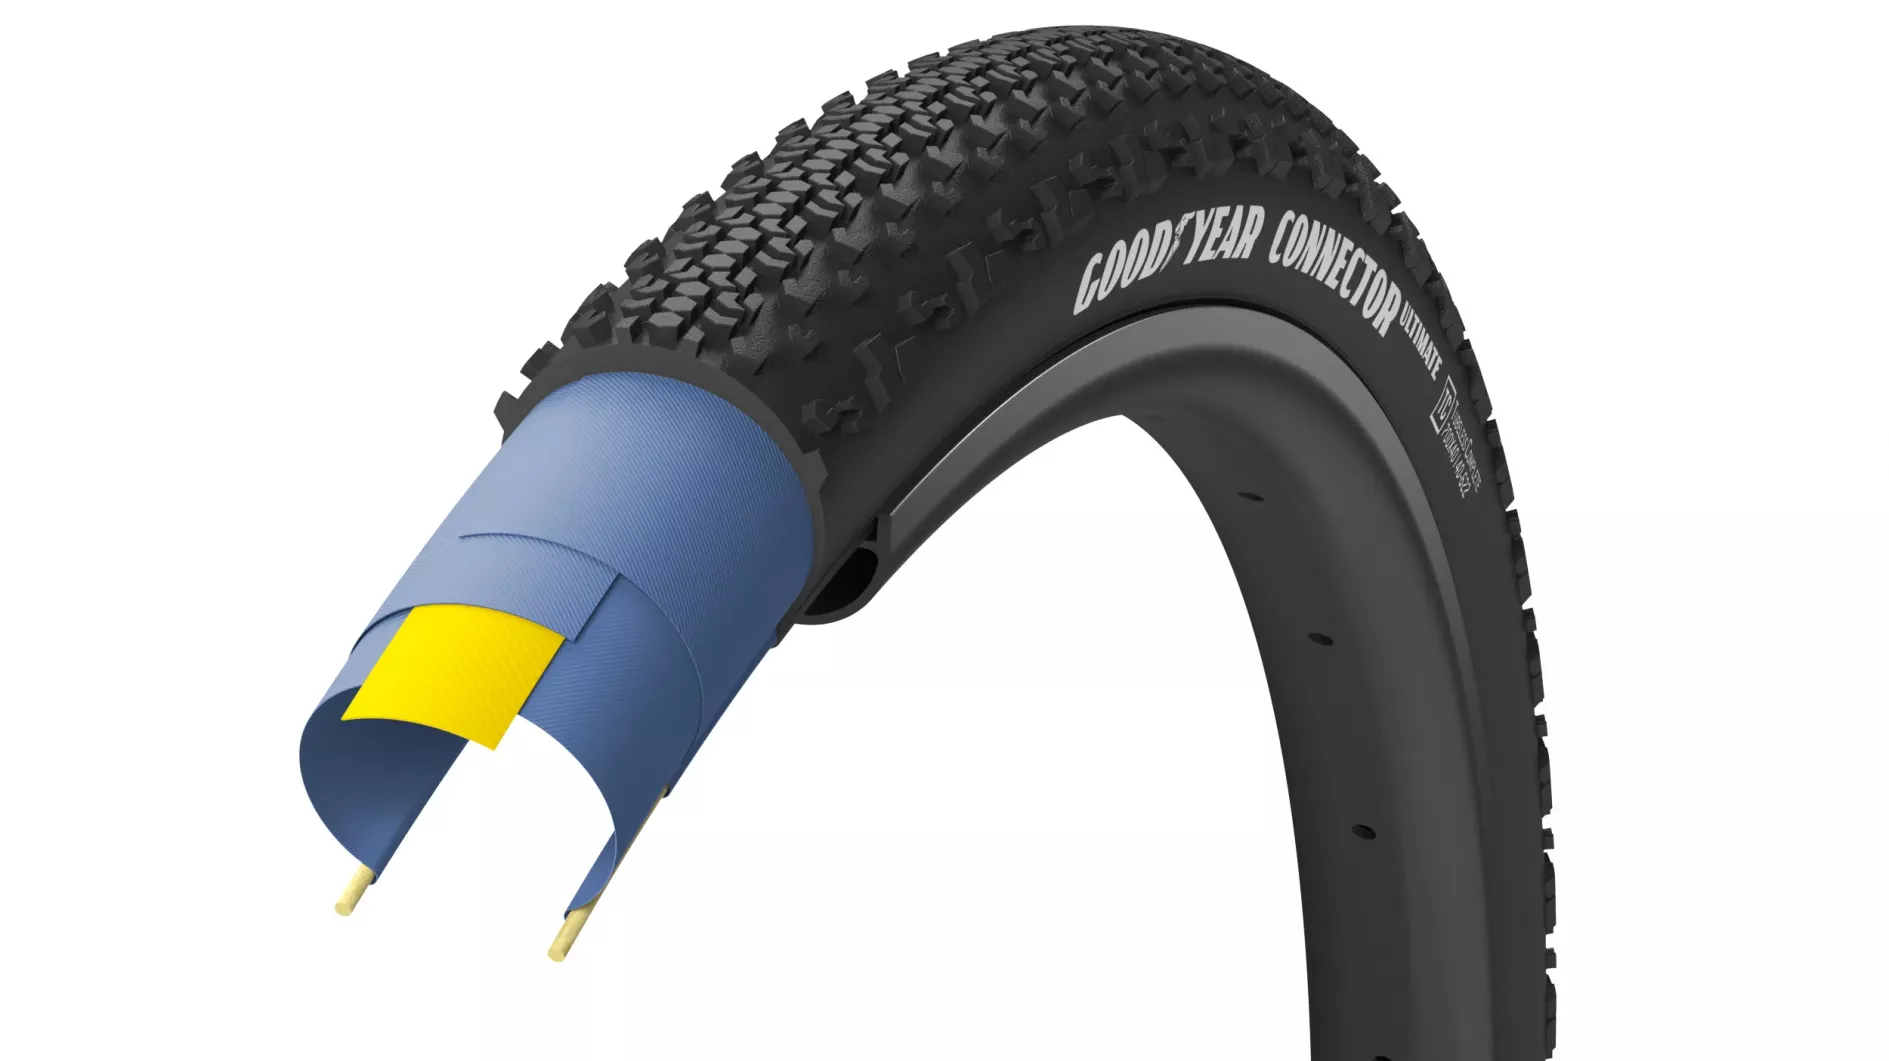 Фотографія Покришка GoodYear CONNECTOR tubeless complete, 700x40 (40-622) folding, 120tpi, Чорна 